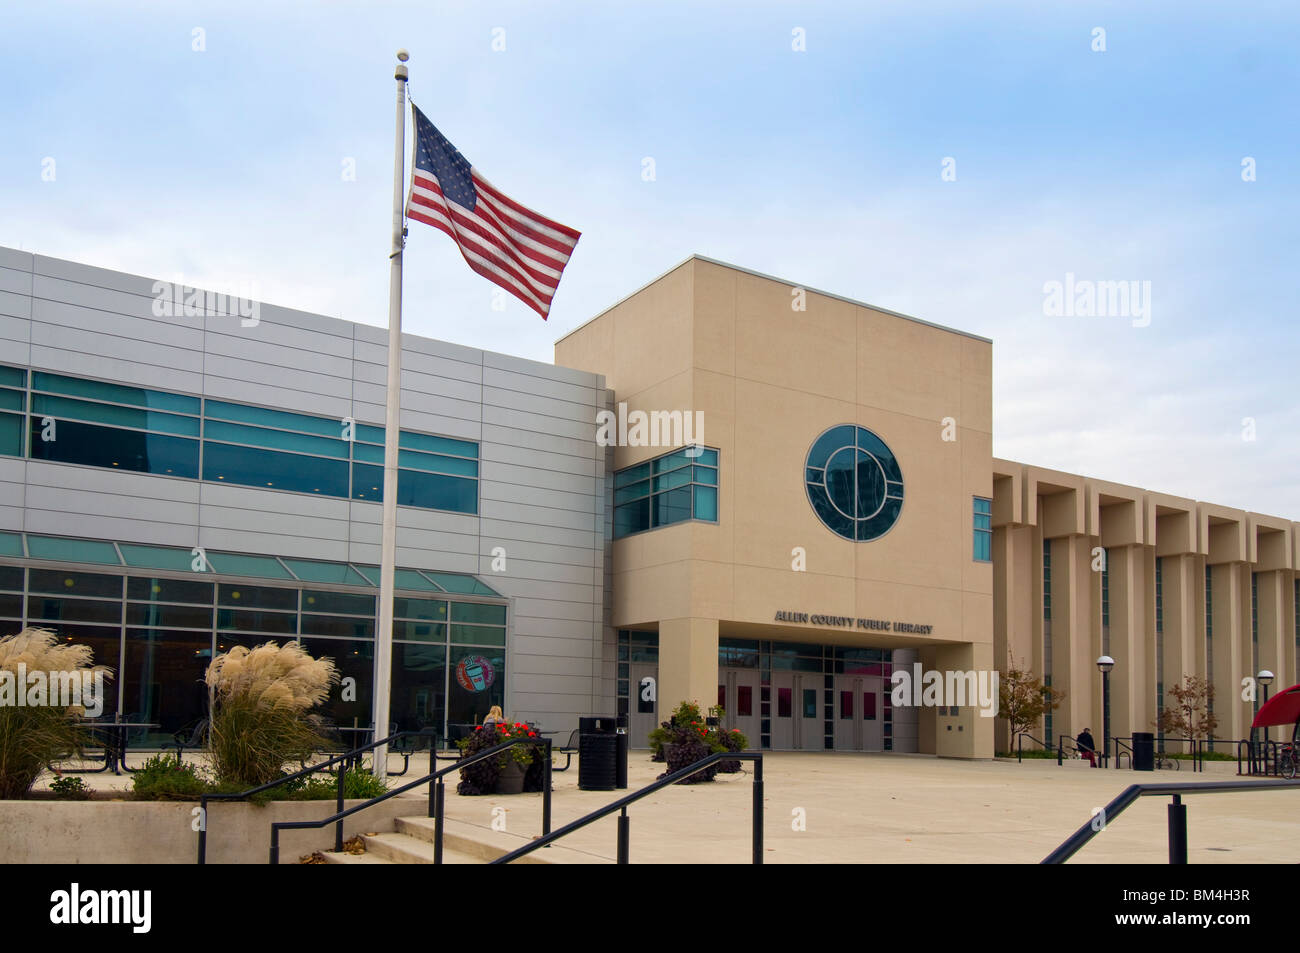 Allen County Public Library in Fort Wayne, Indiana, USA Stockfoto